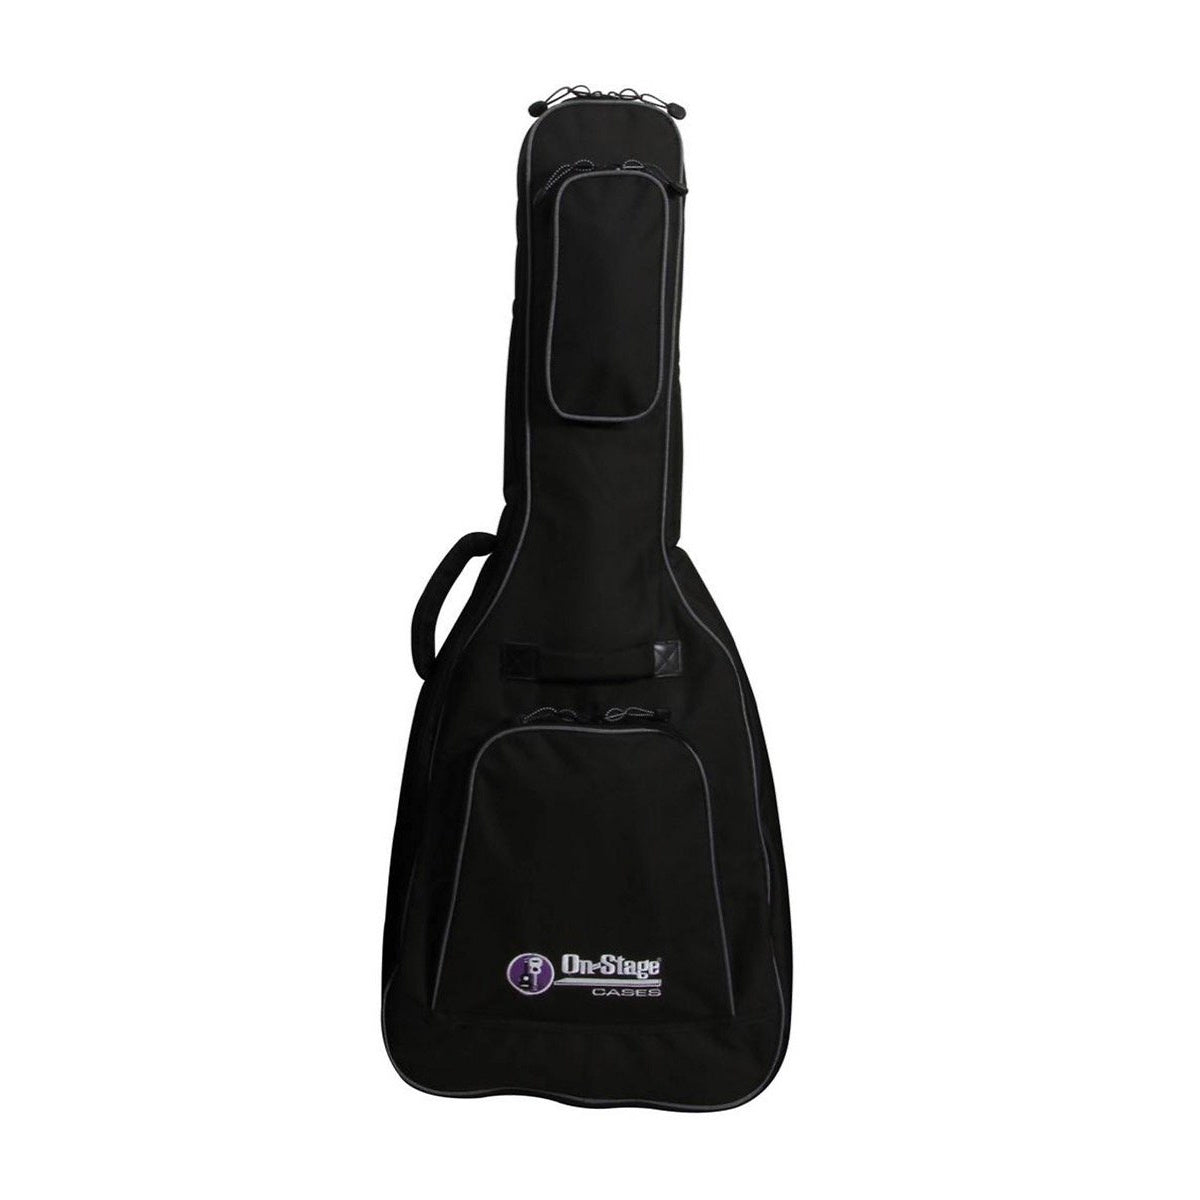 On-Stage GB4770 Deluxe Acoustic Guitar Gig Bag